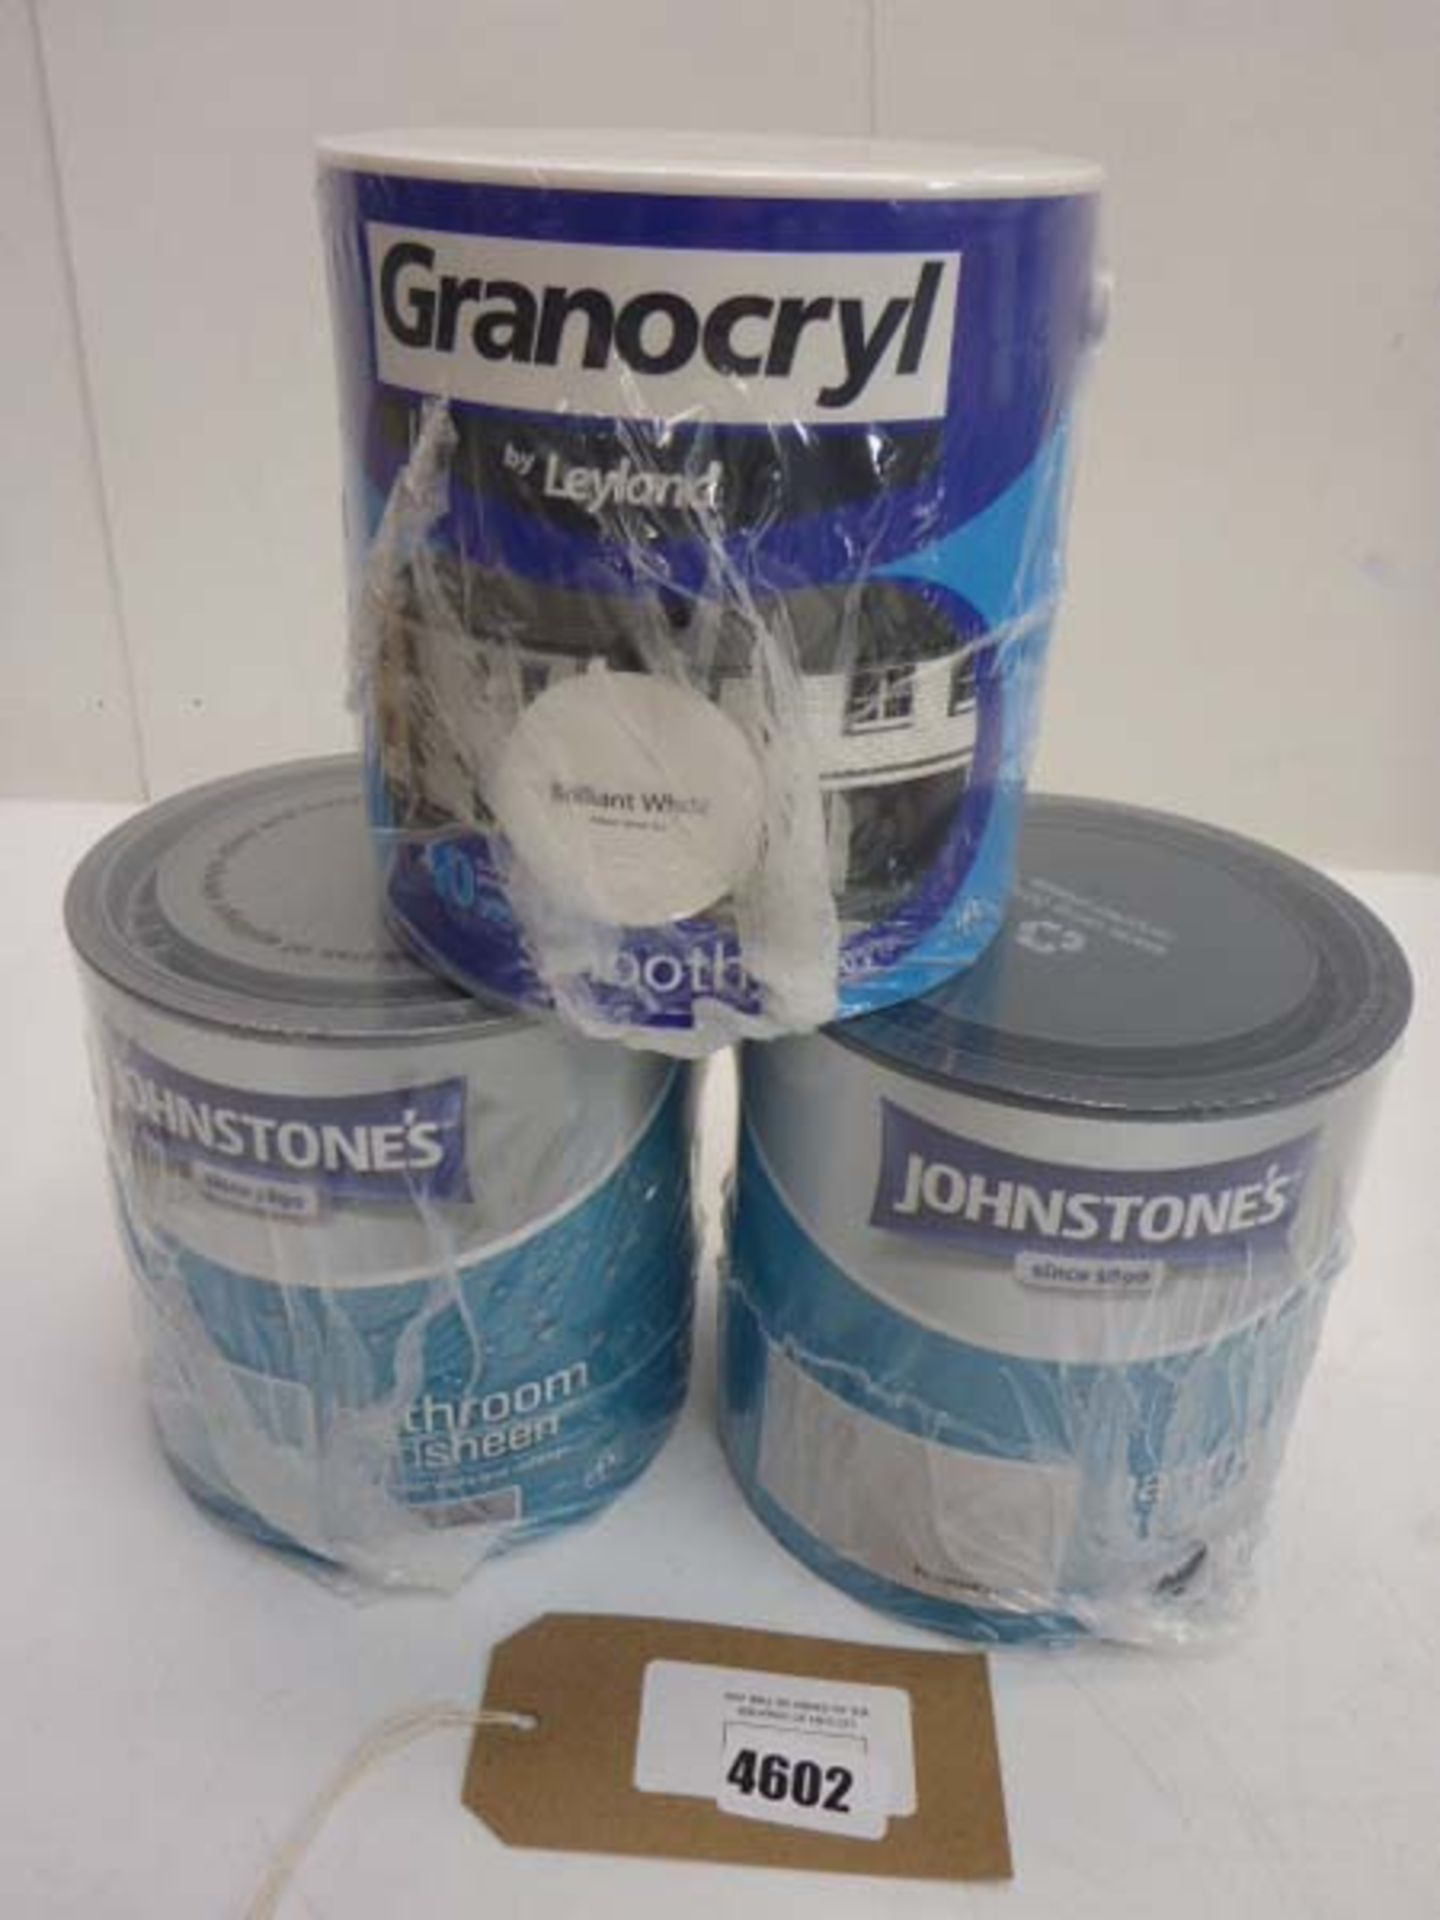 2 cans of Johnstone's bathroom paint and a Can of Granocryl masonry paint